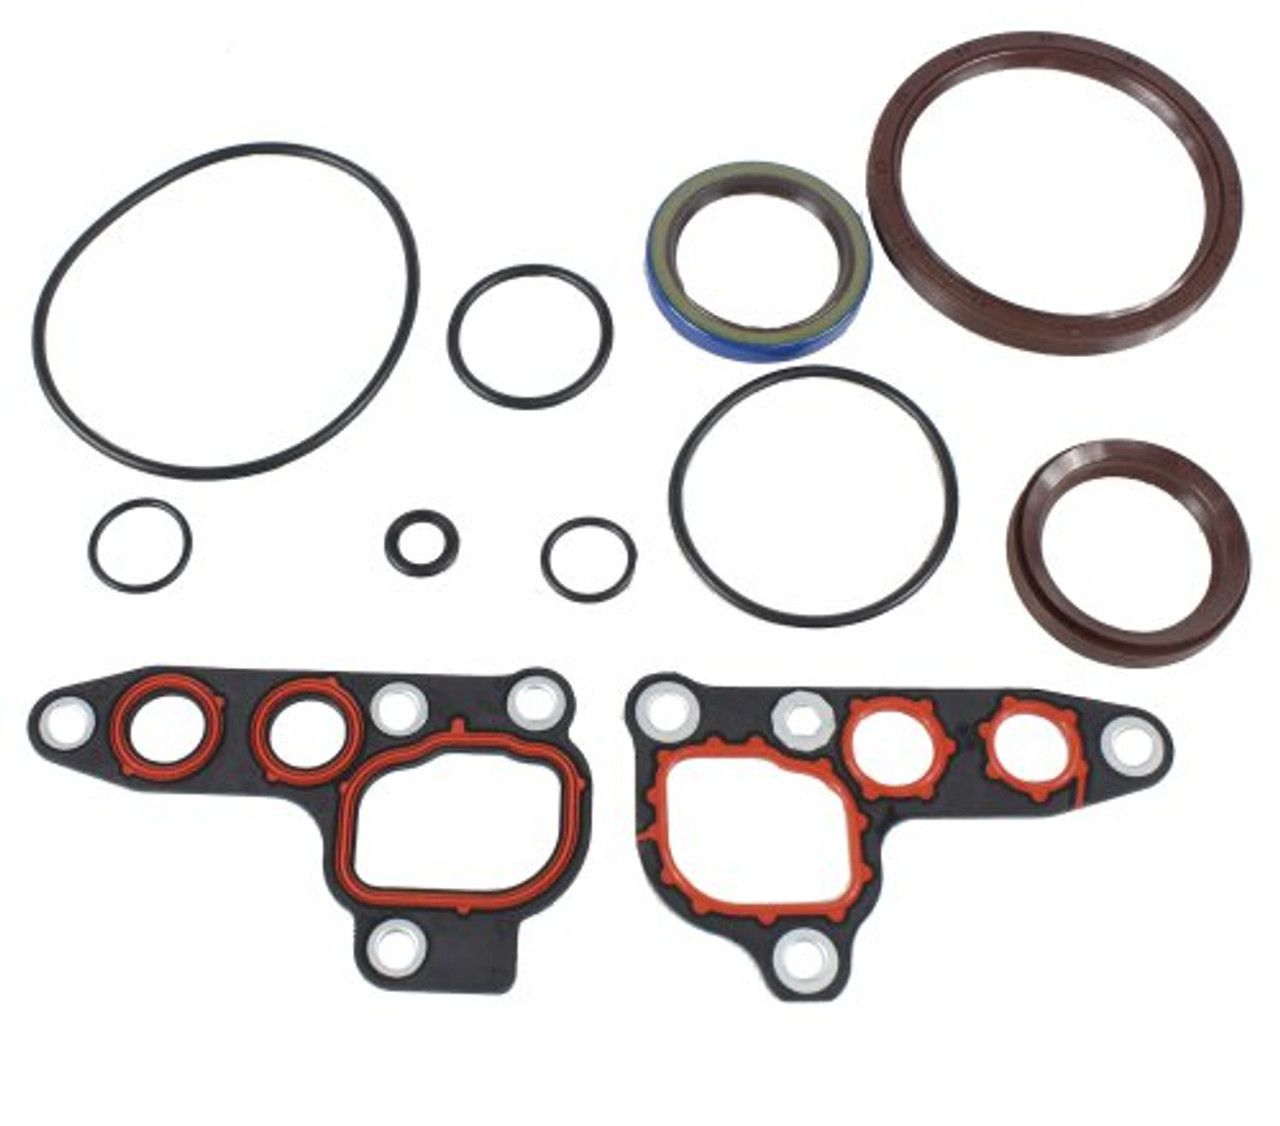 Lower Gasket Set - 2009 Ford Mustang 4.6L Engine Parts # LGS4150ZE265